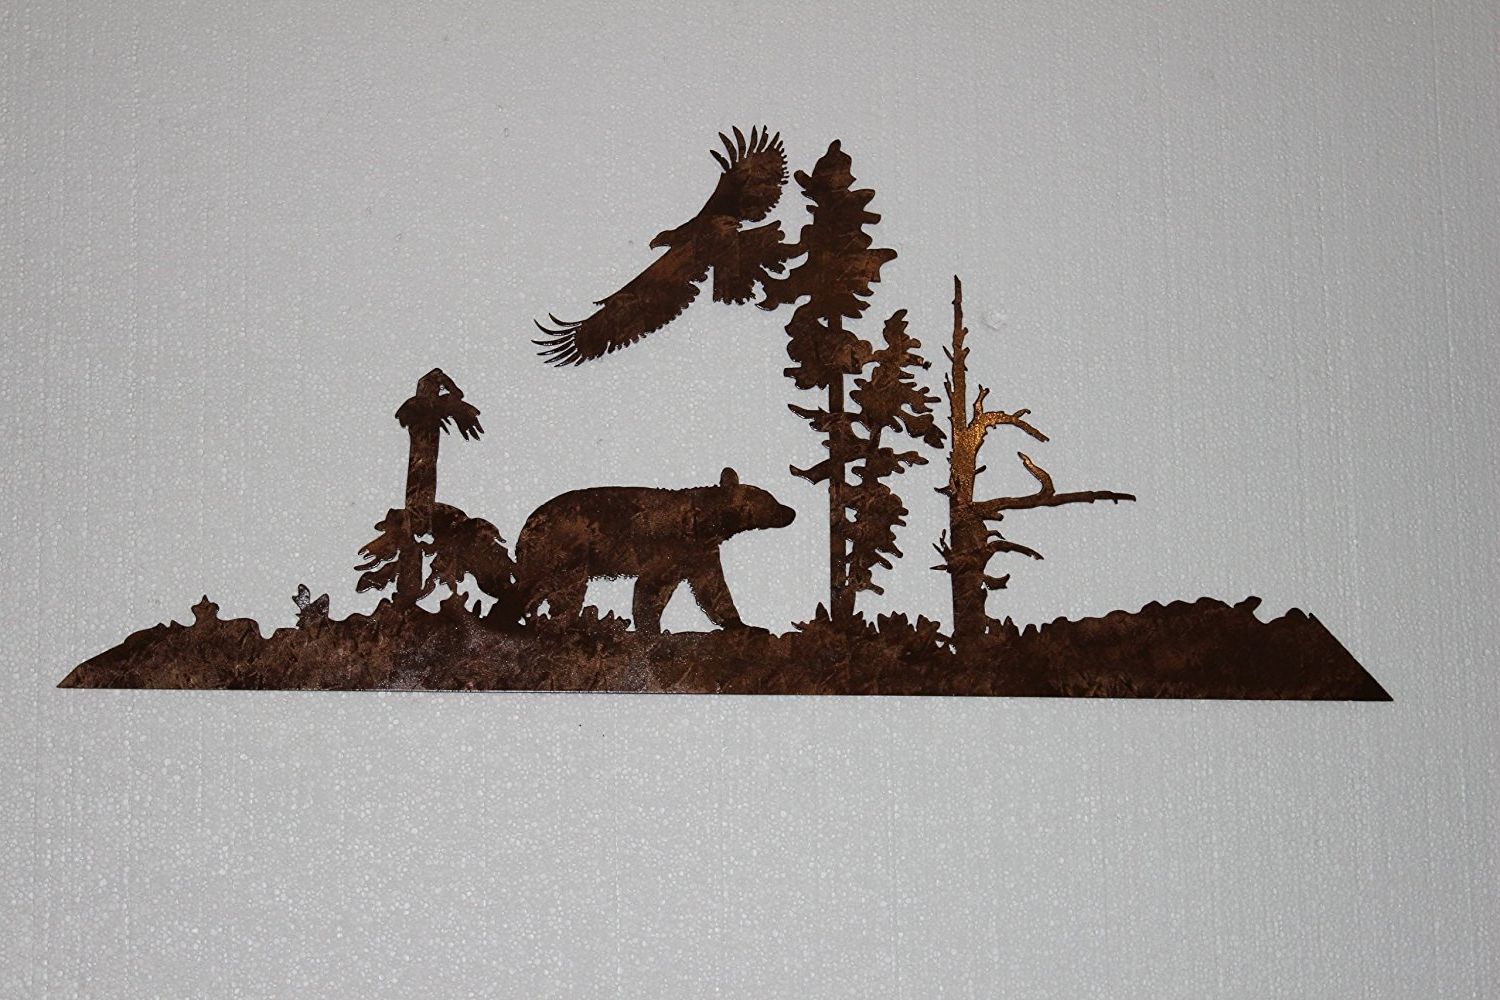 Most Recently Released Country Metal Wall Art Intended For Amazon: Bear And Eagle Metal Wall Art Country Rustic Decor (View 1 of 15)